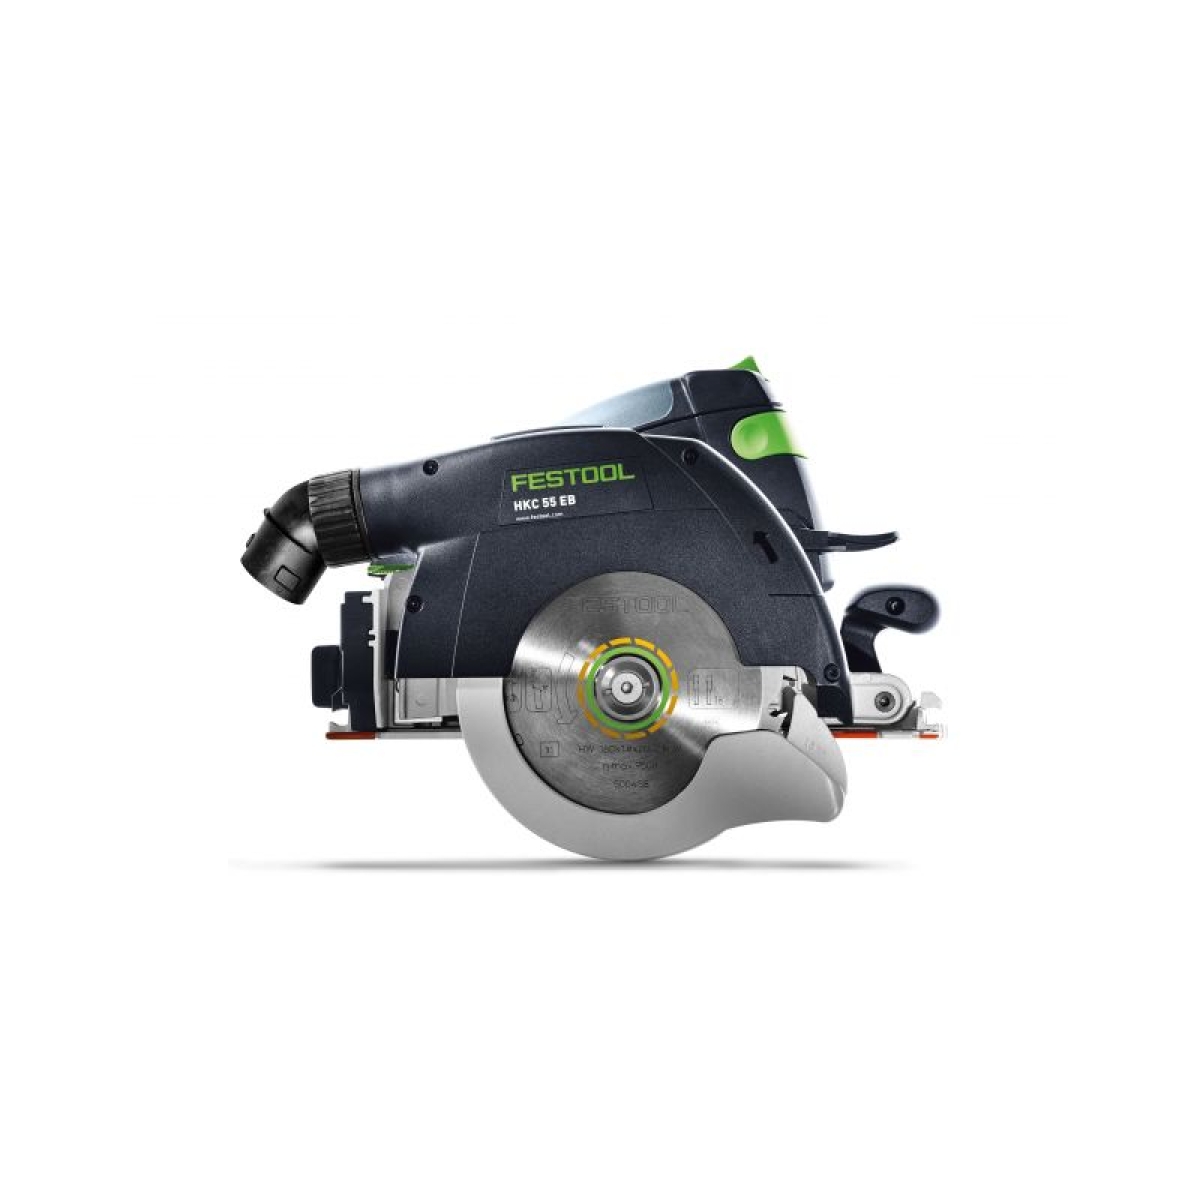 Festool HKC 55 18v Circular Saw Cordless in Systainer